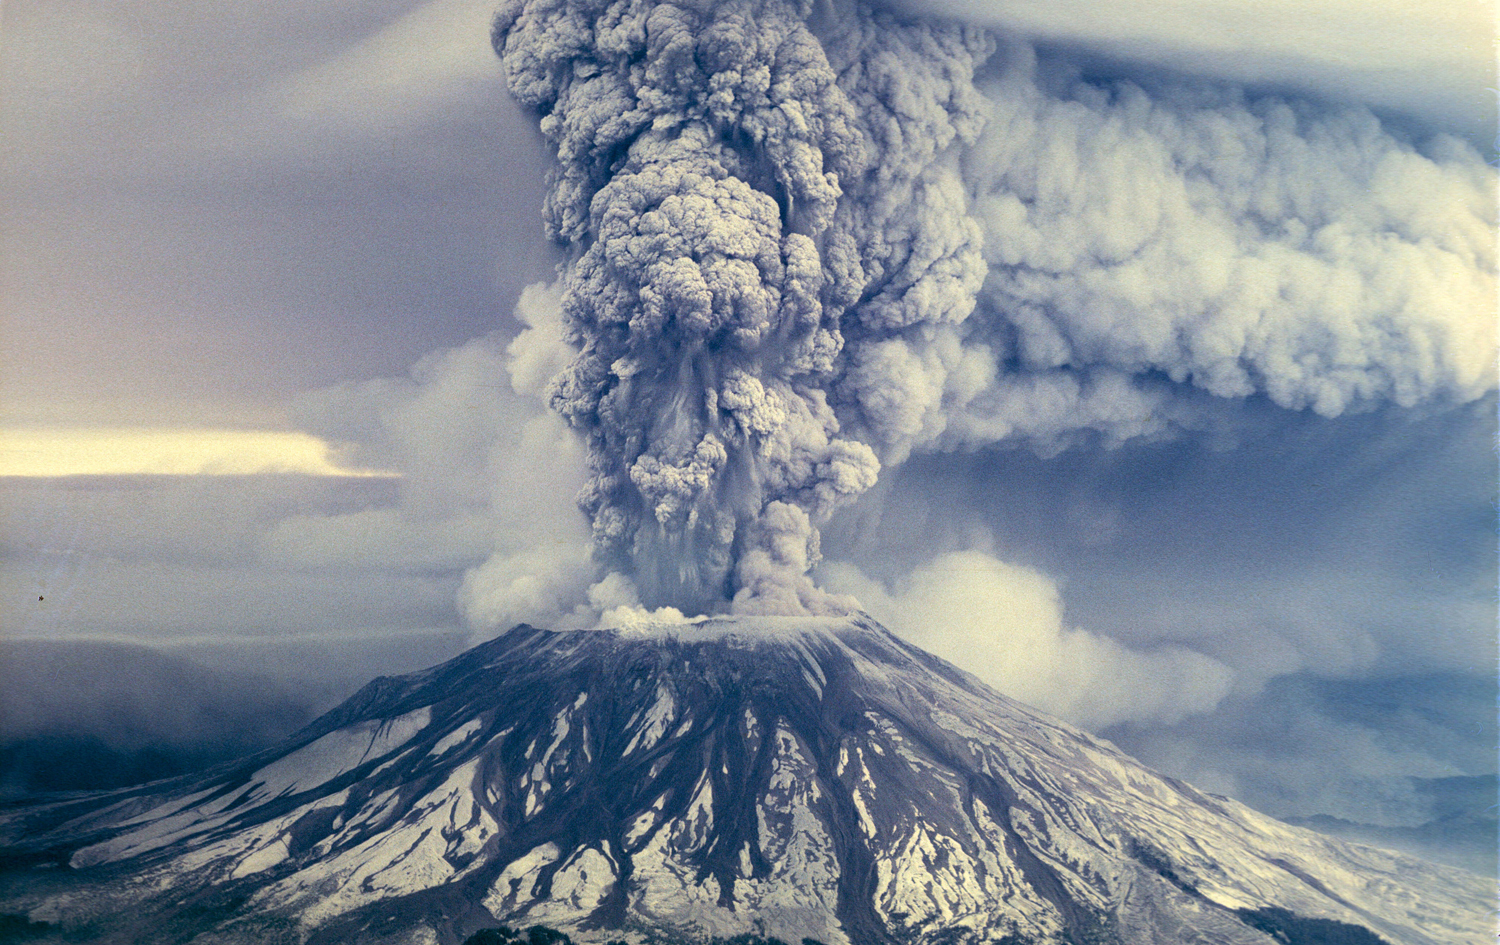 Mount St. Helens, WA eruption on May 18th, 1980  